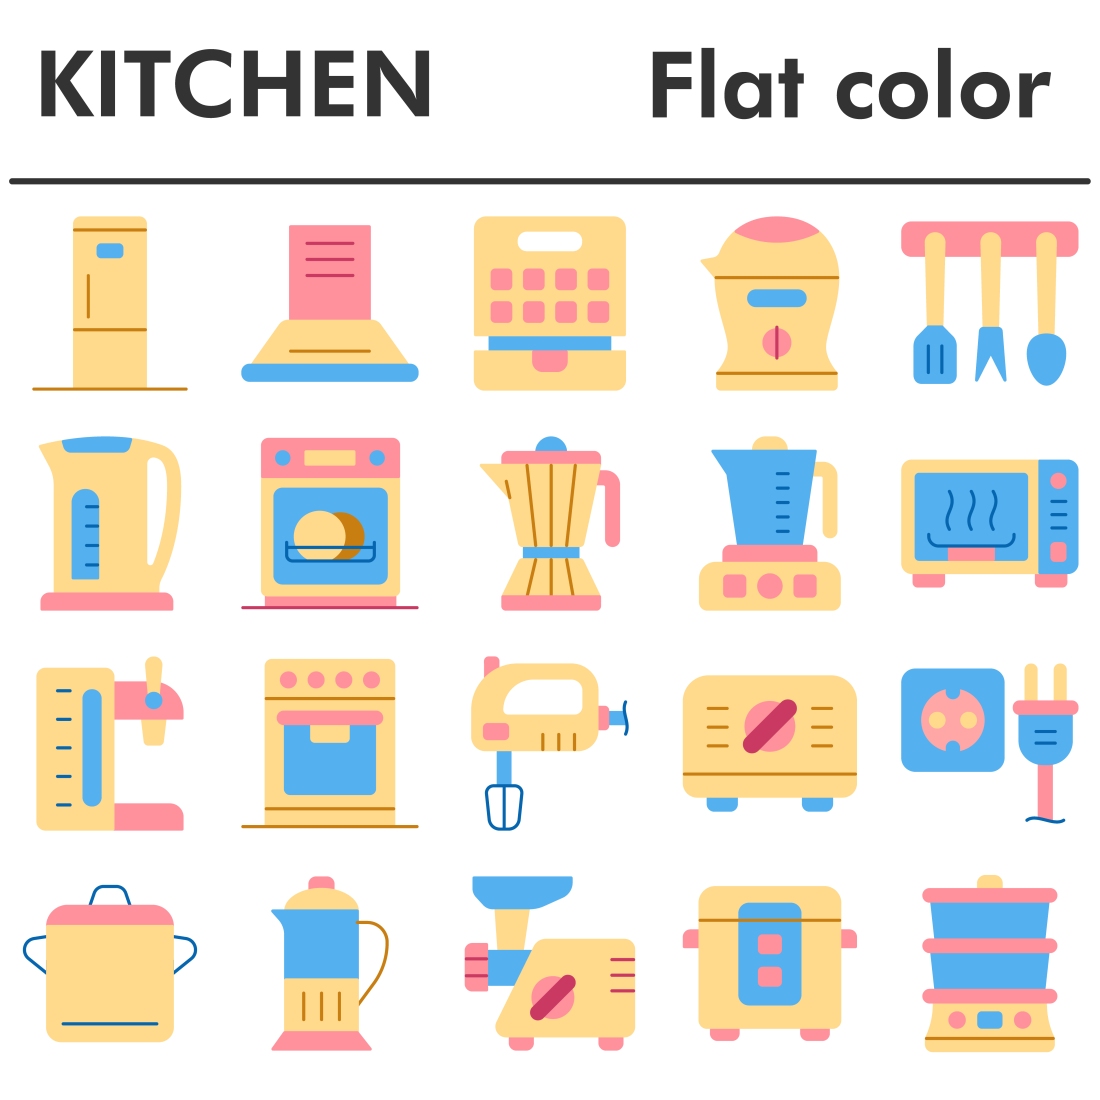 Kitchen icons set, flat color style cover image.